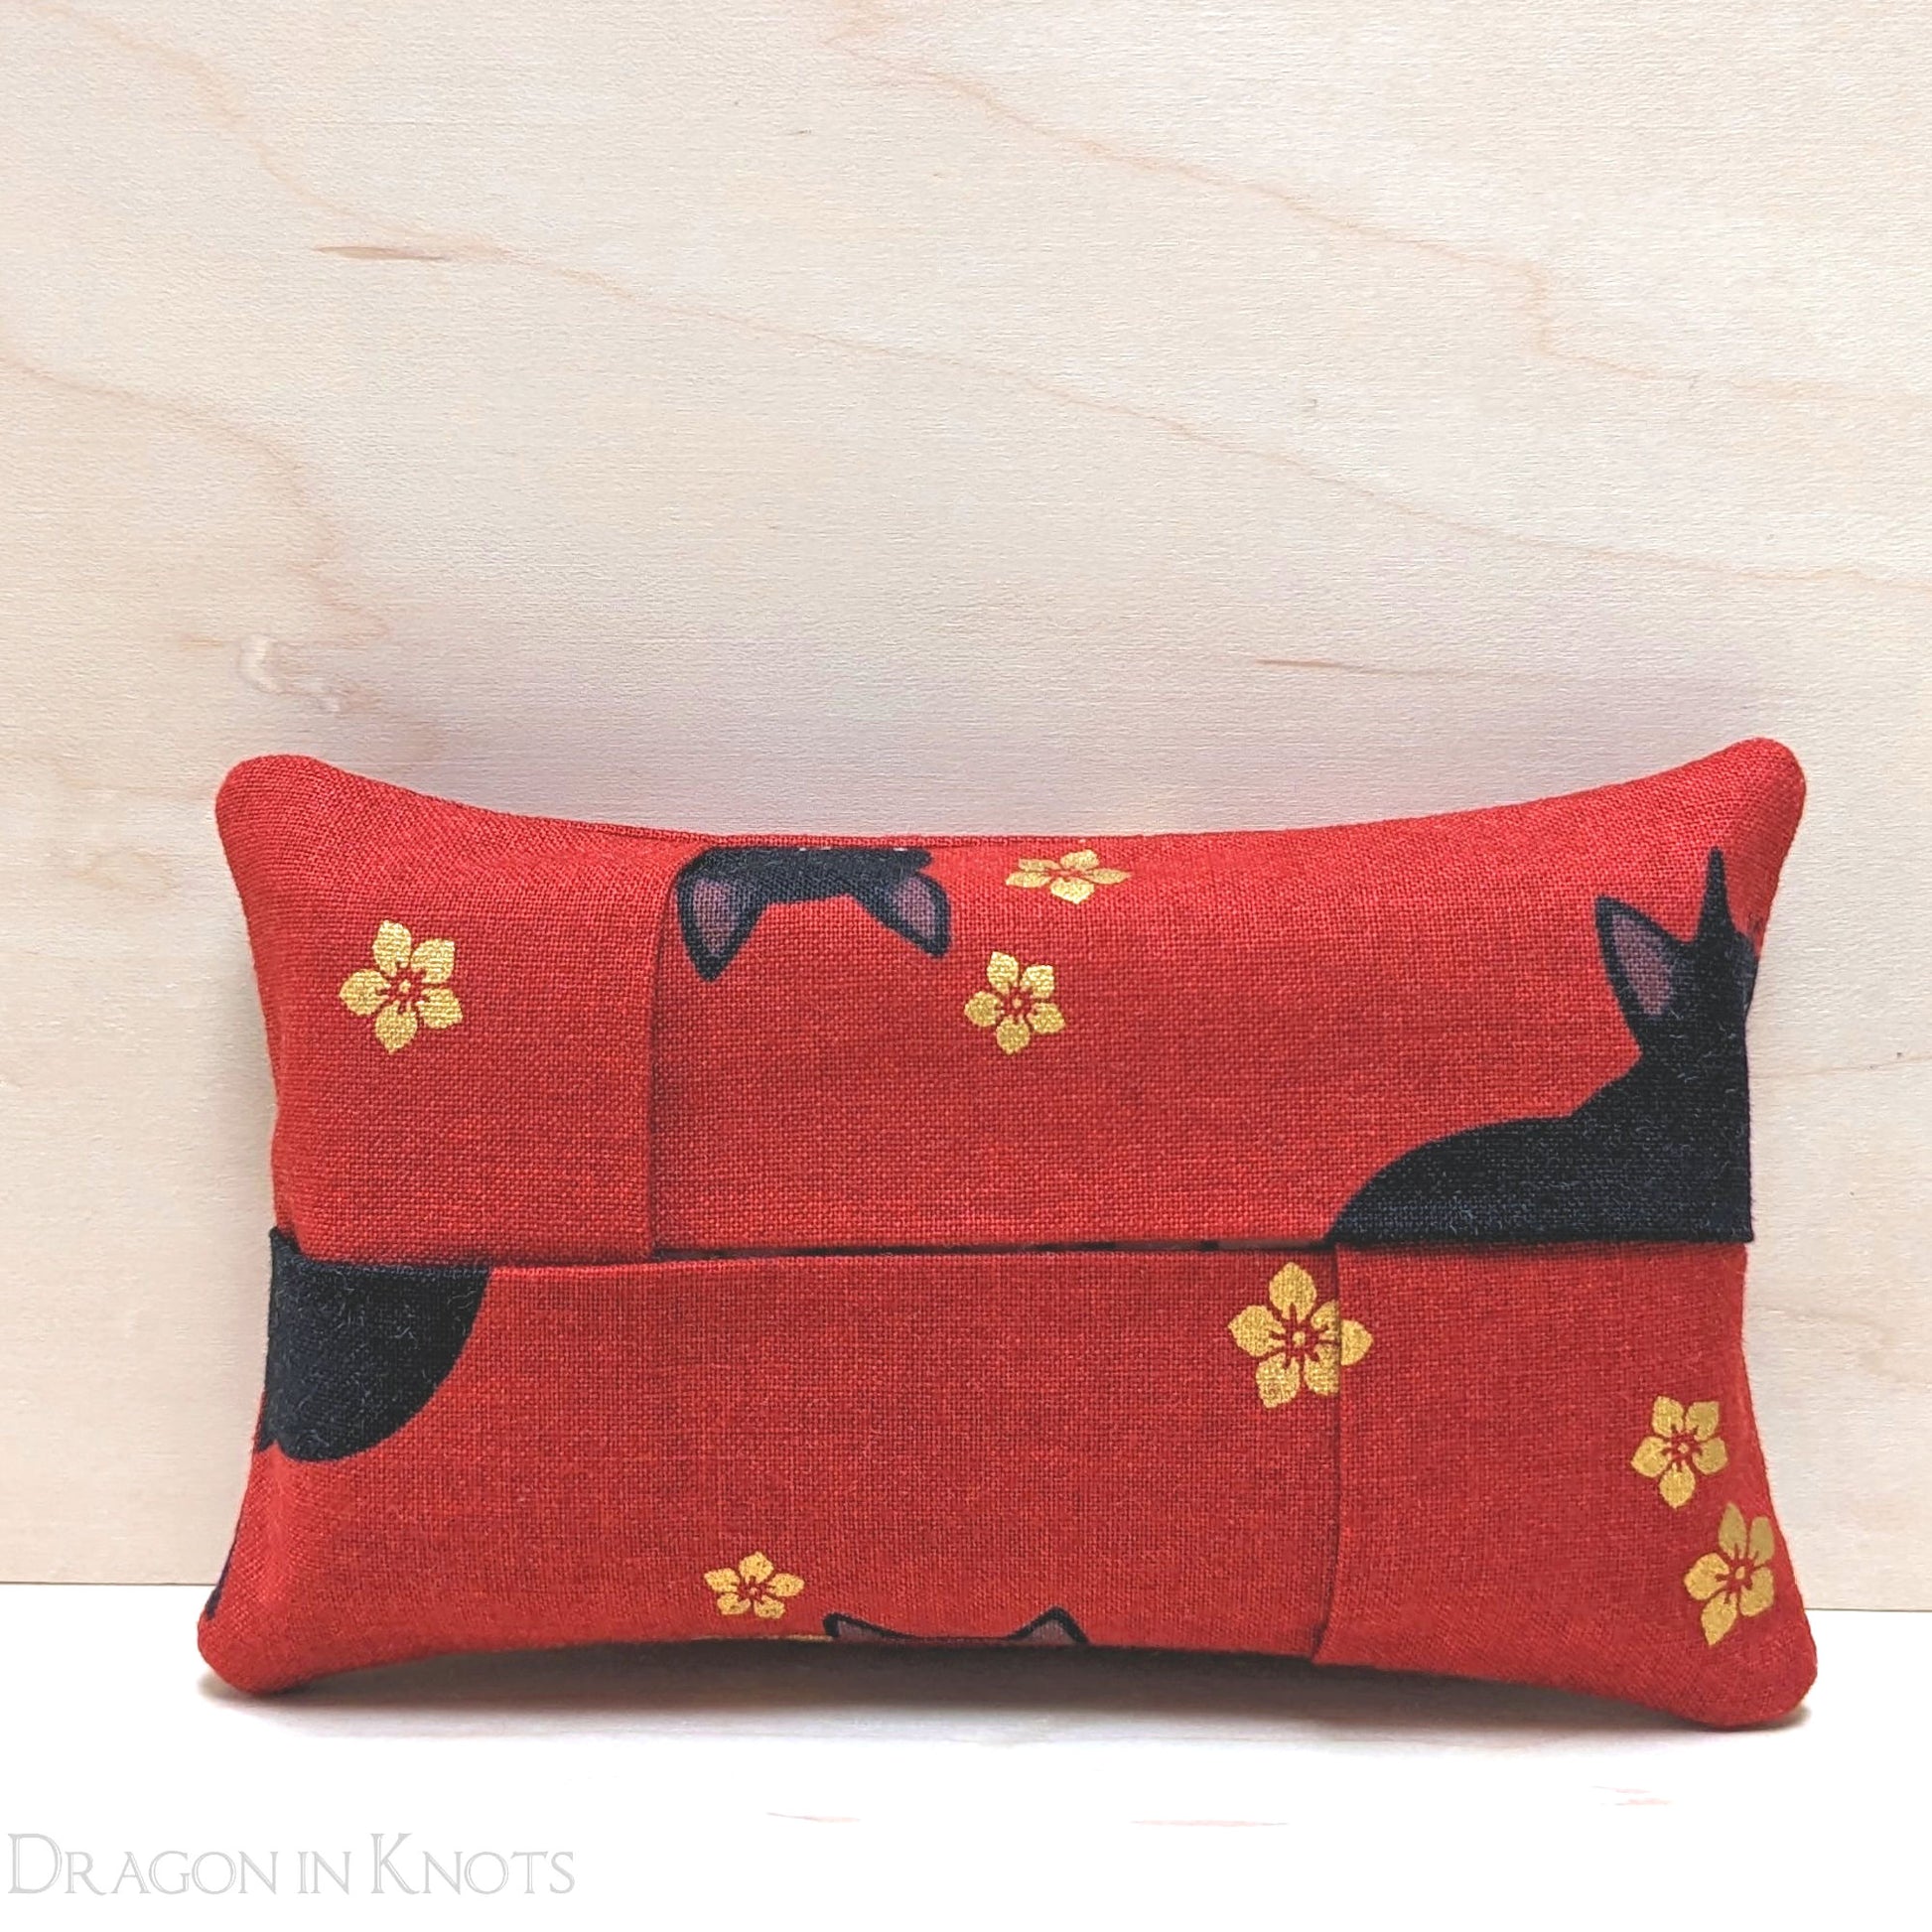 Black Cat To-Go Tissue Holder - Red - Dragon in Knots